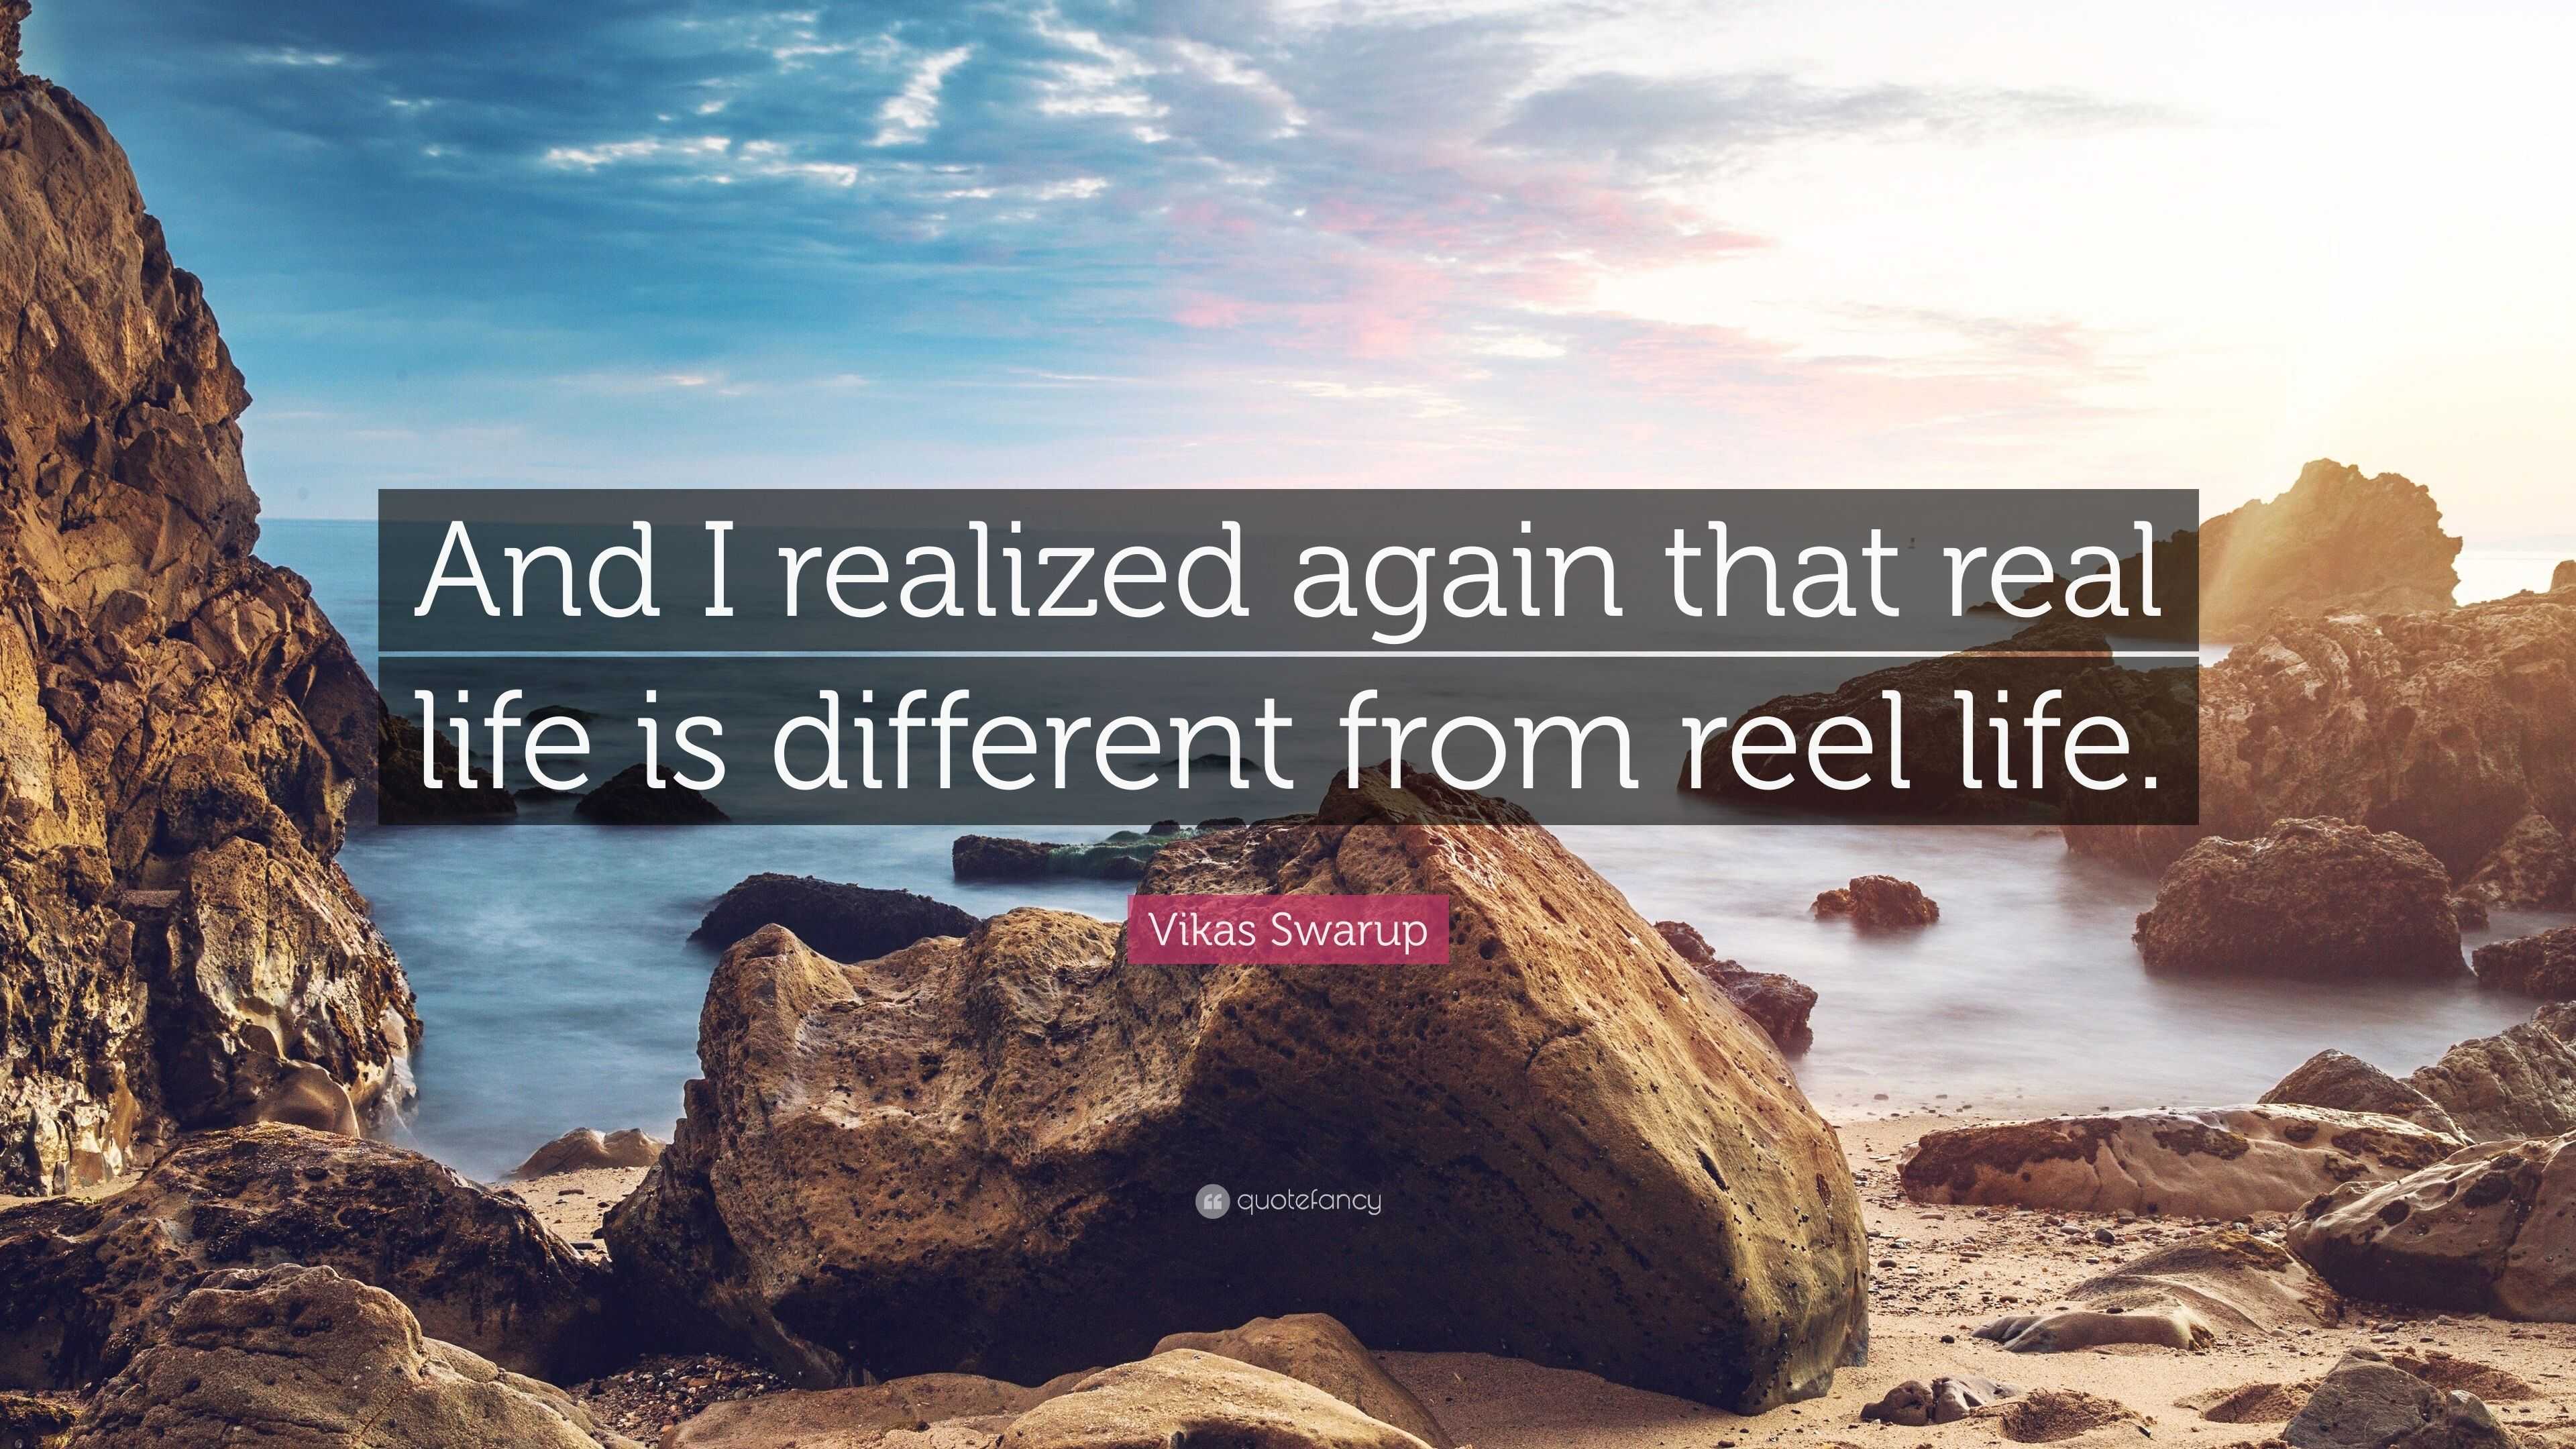 Vikas Swarup Quote: “And I realized again that real life is different from reel  life.”